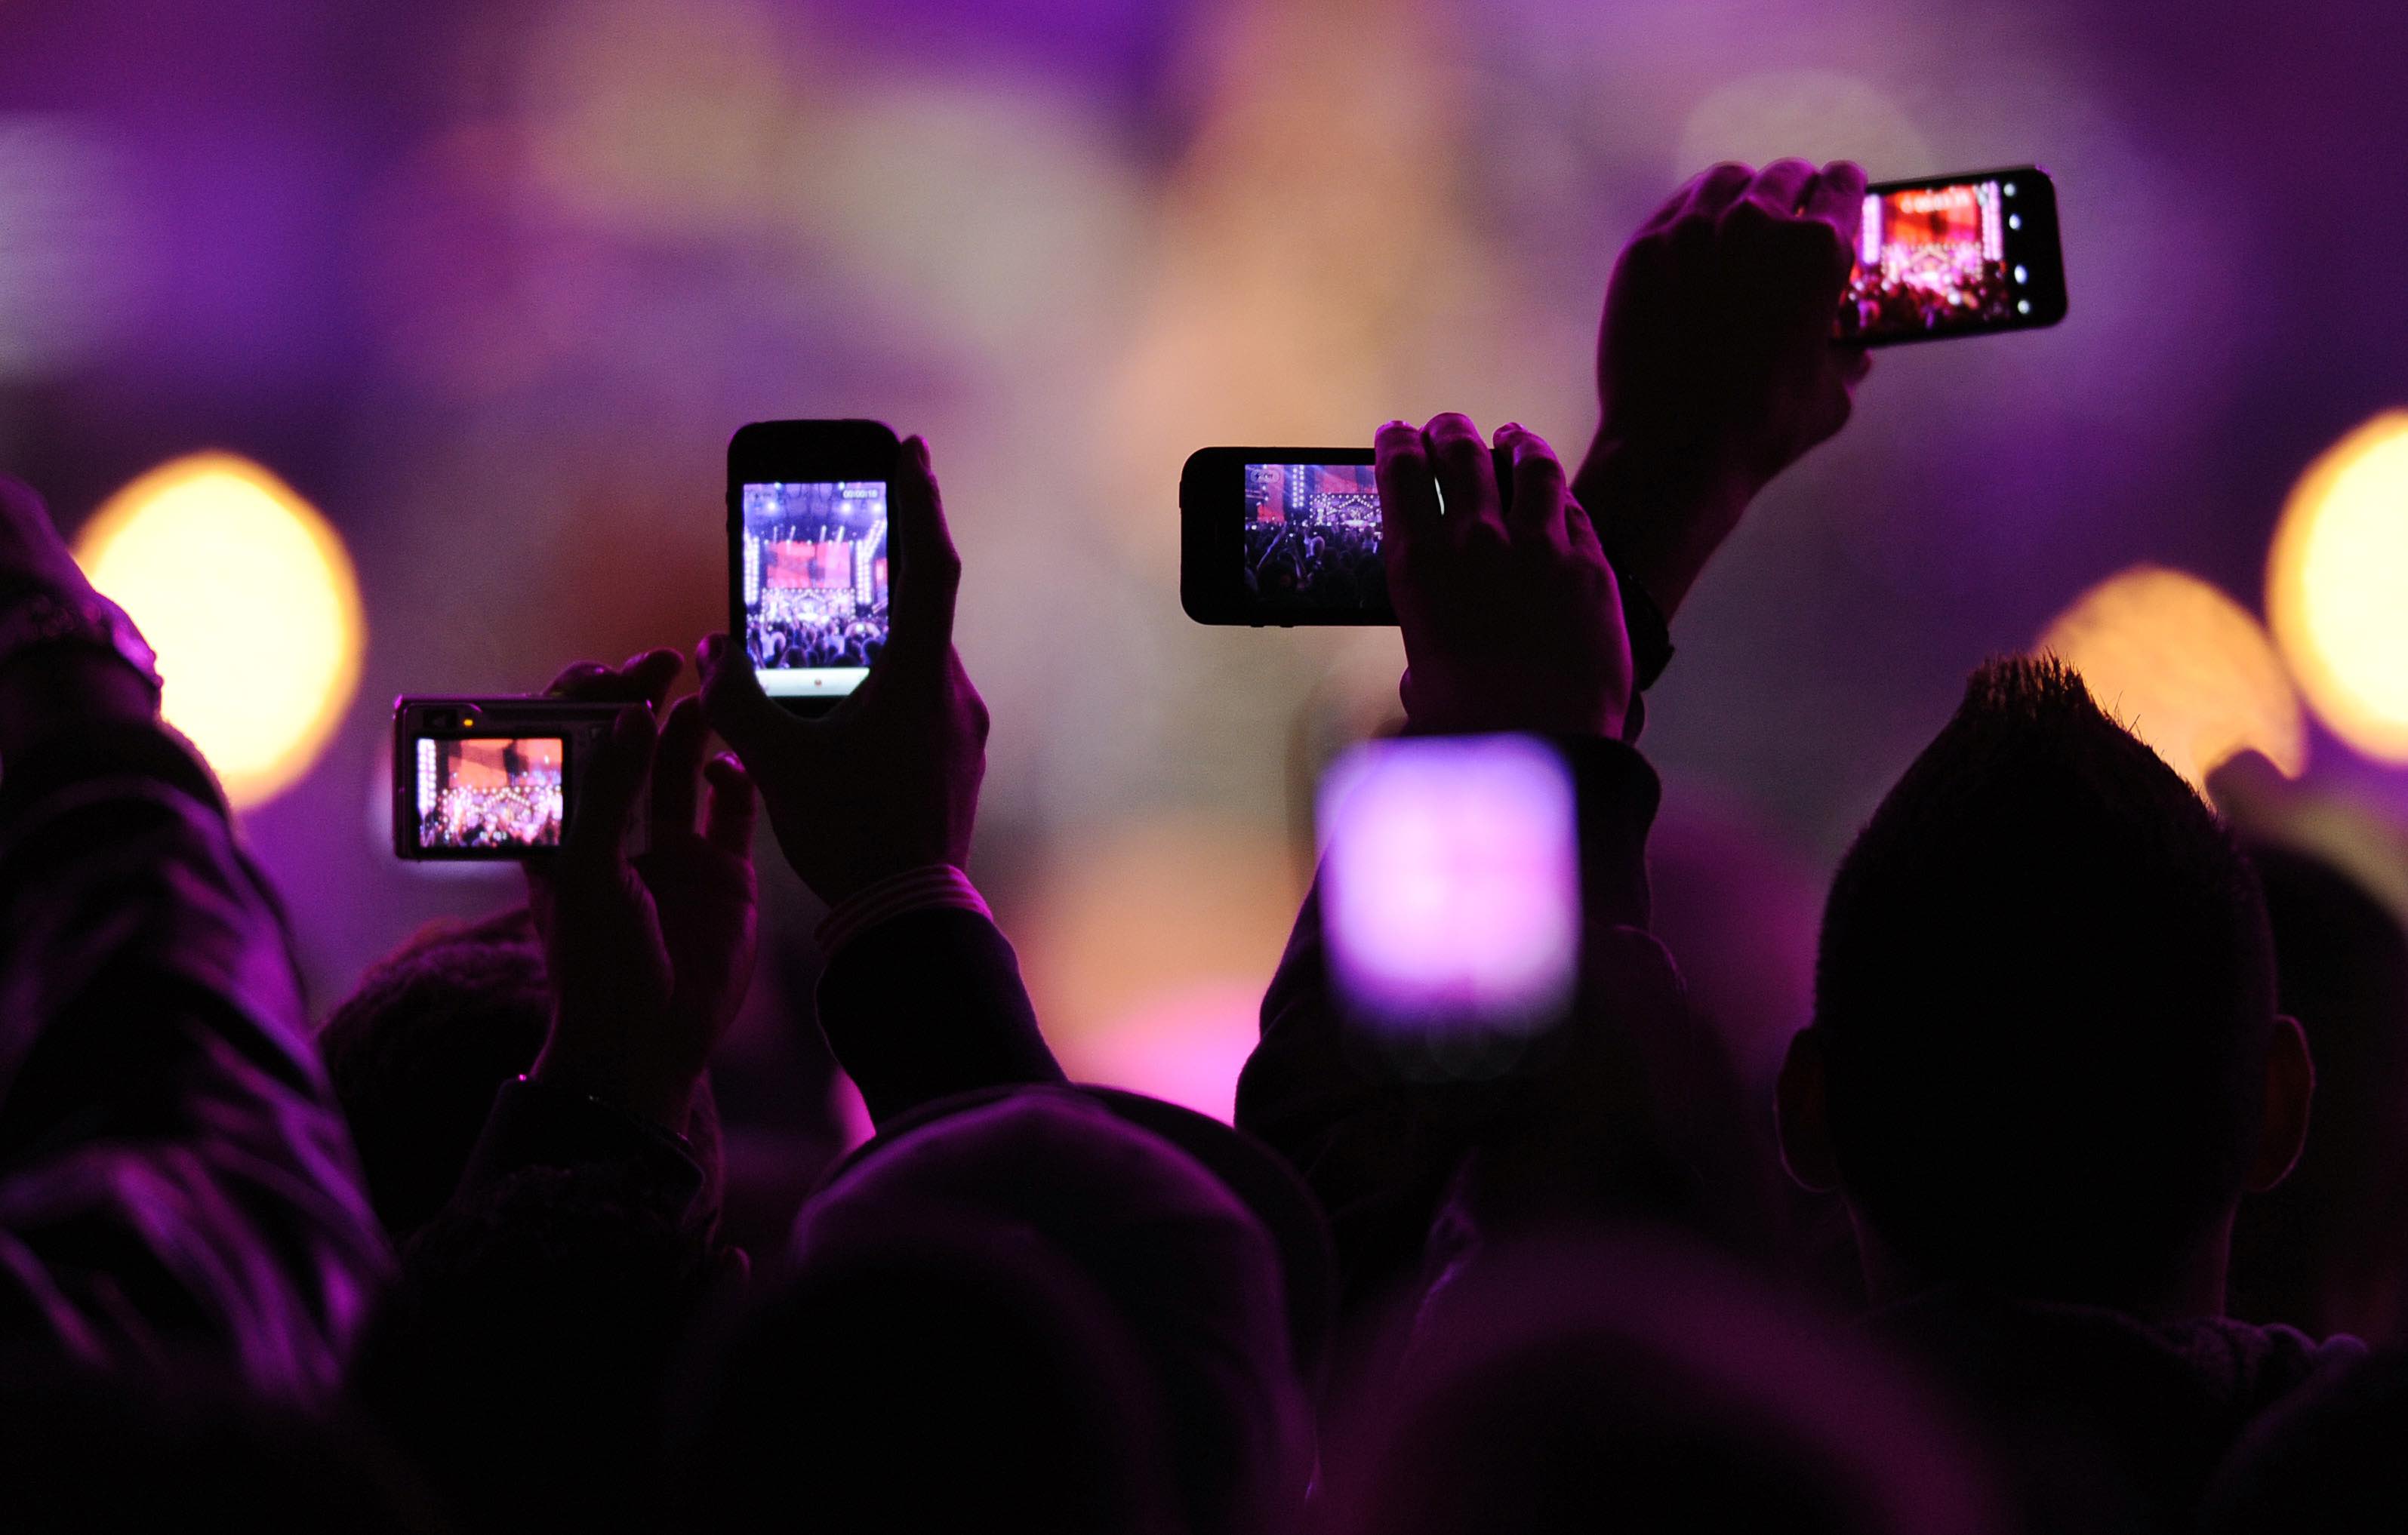 Fans take photos with their mobile phones during the VH1 "Divas Salute The Troops" show at the Marine Corps Air Station Miramar in San Diego, December 3, 2010. REUTERS/K.C. Alfred (UNITED STATES - Tags: ENTERTAINMENT SCI TECH IMAGES OF THE DAY) - RTXVDL9